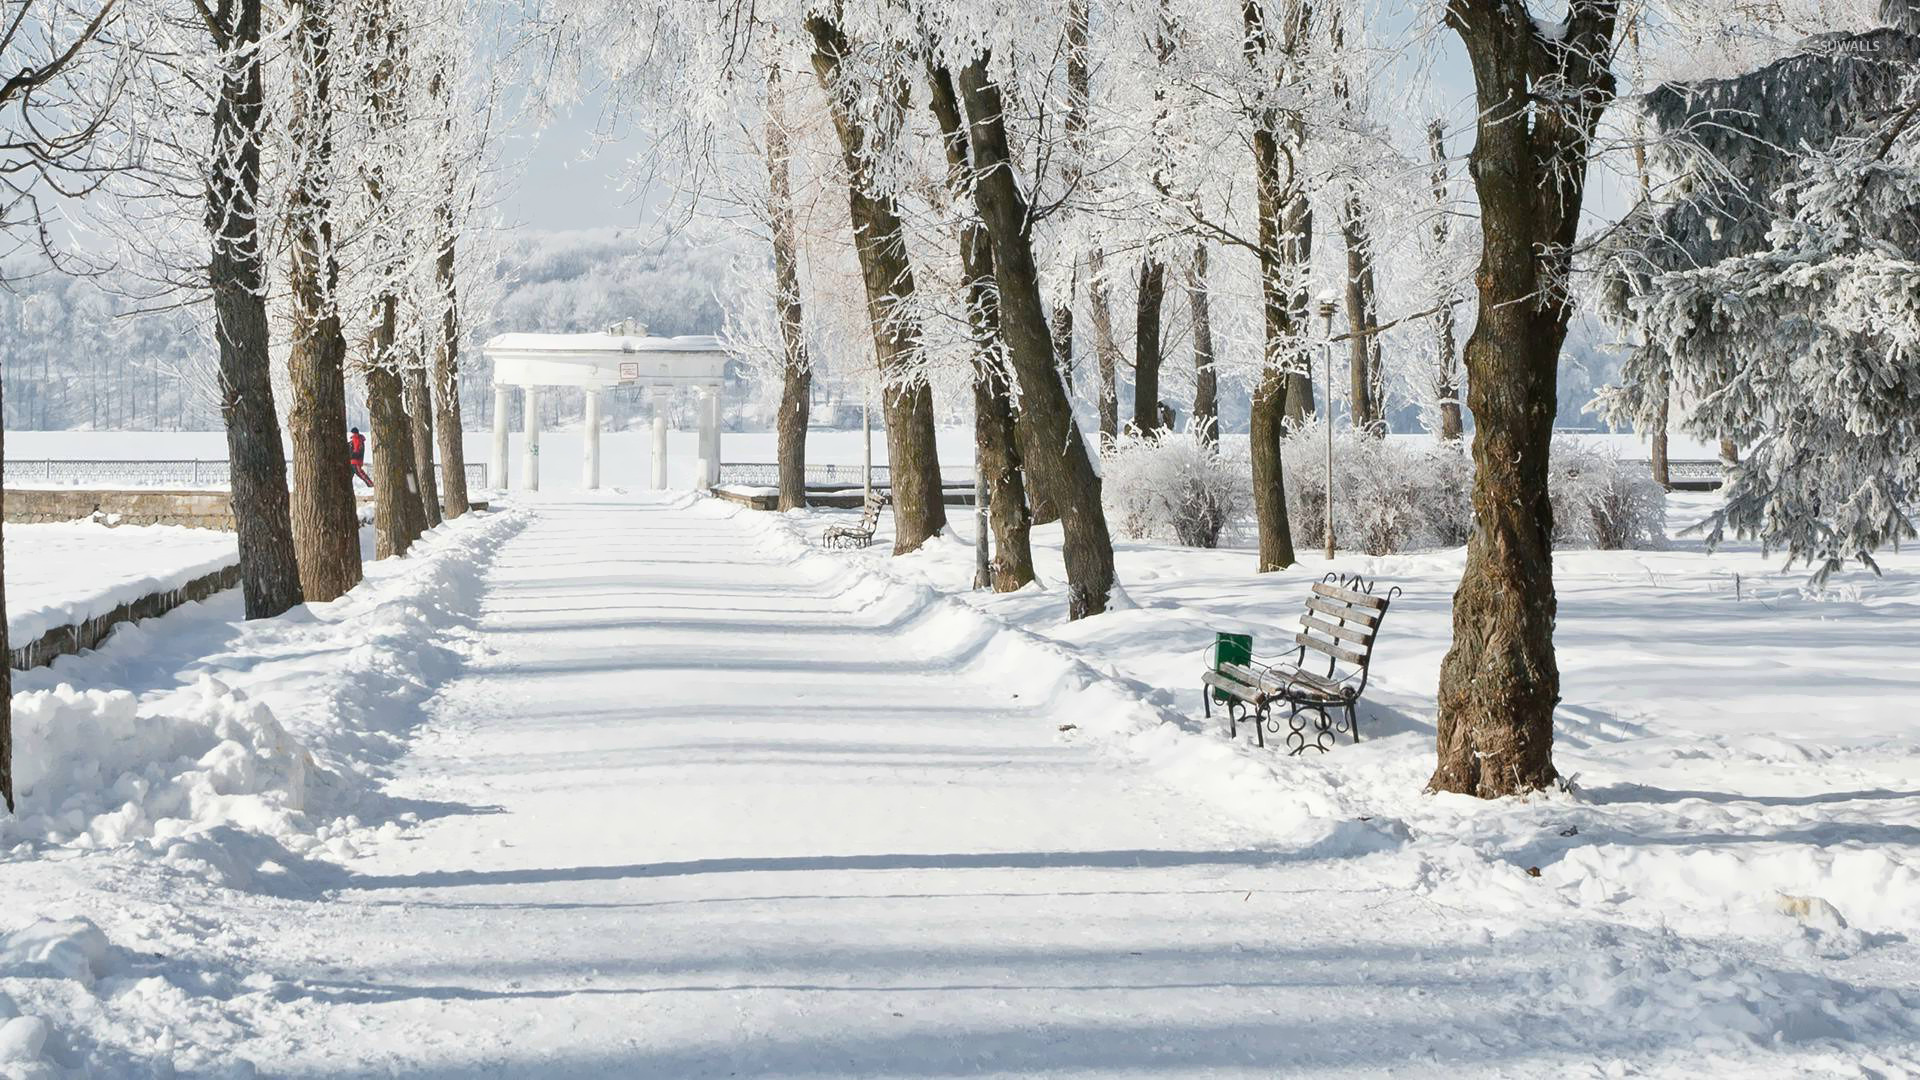 Snowy road in the park wallpaper - Photography wallpapers - #16265